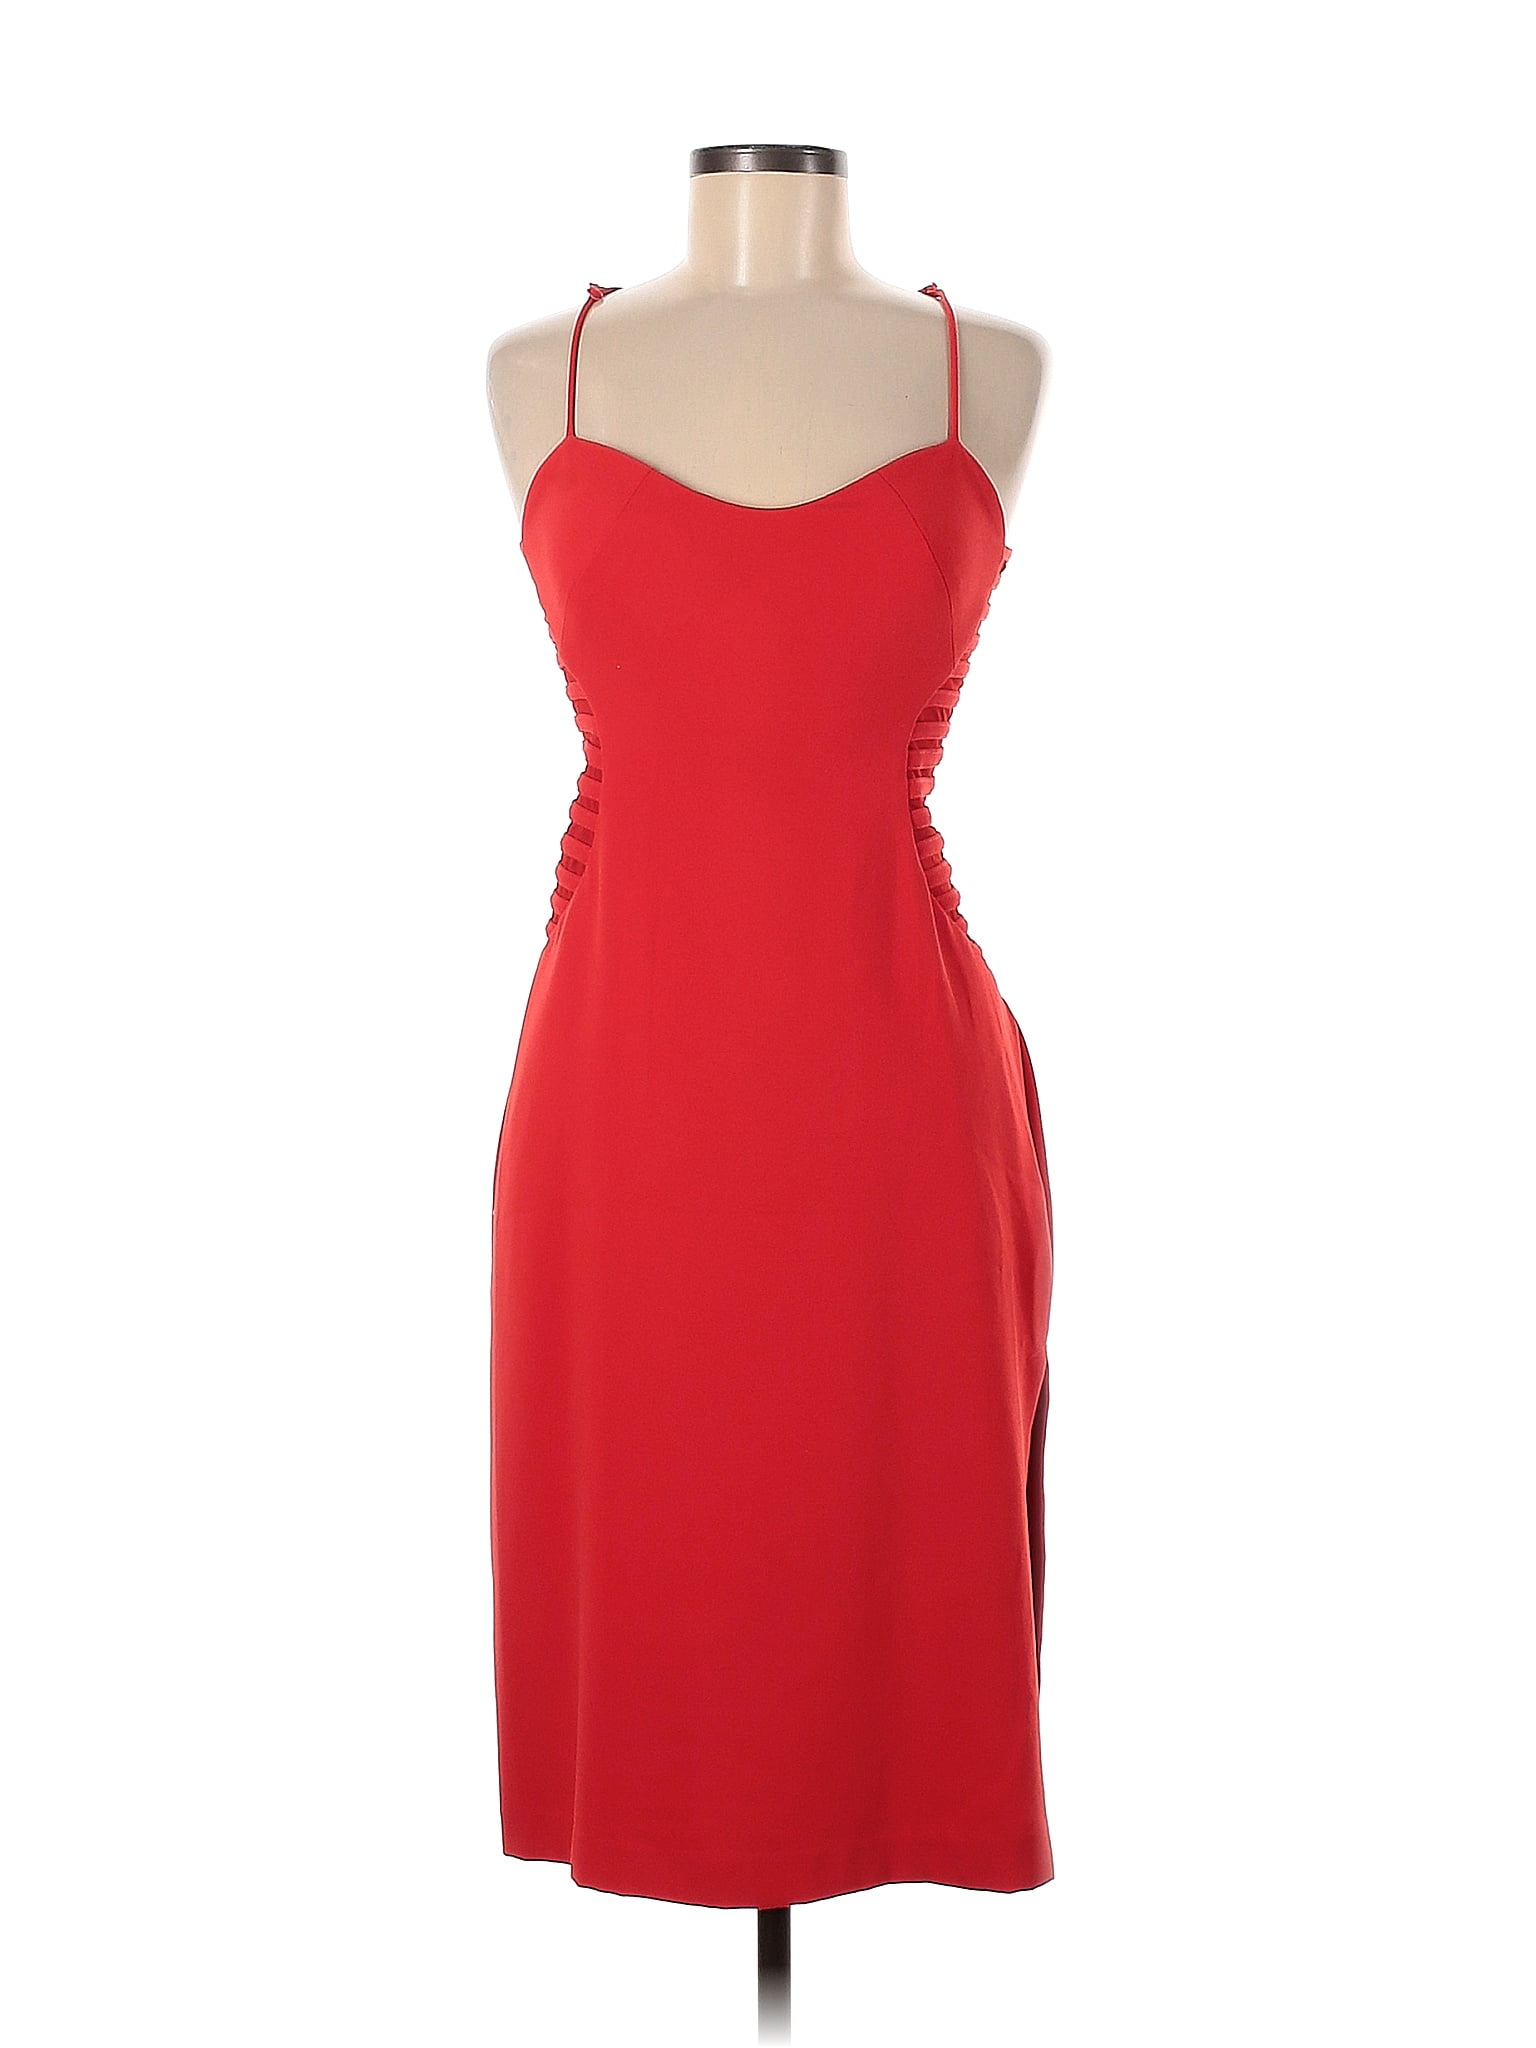 Halston 100% Polyester Solid Red Side Strip Dress Size 6 - 78% off ...